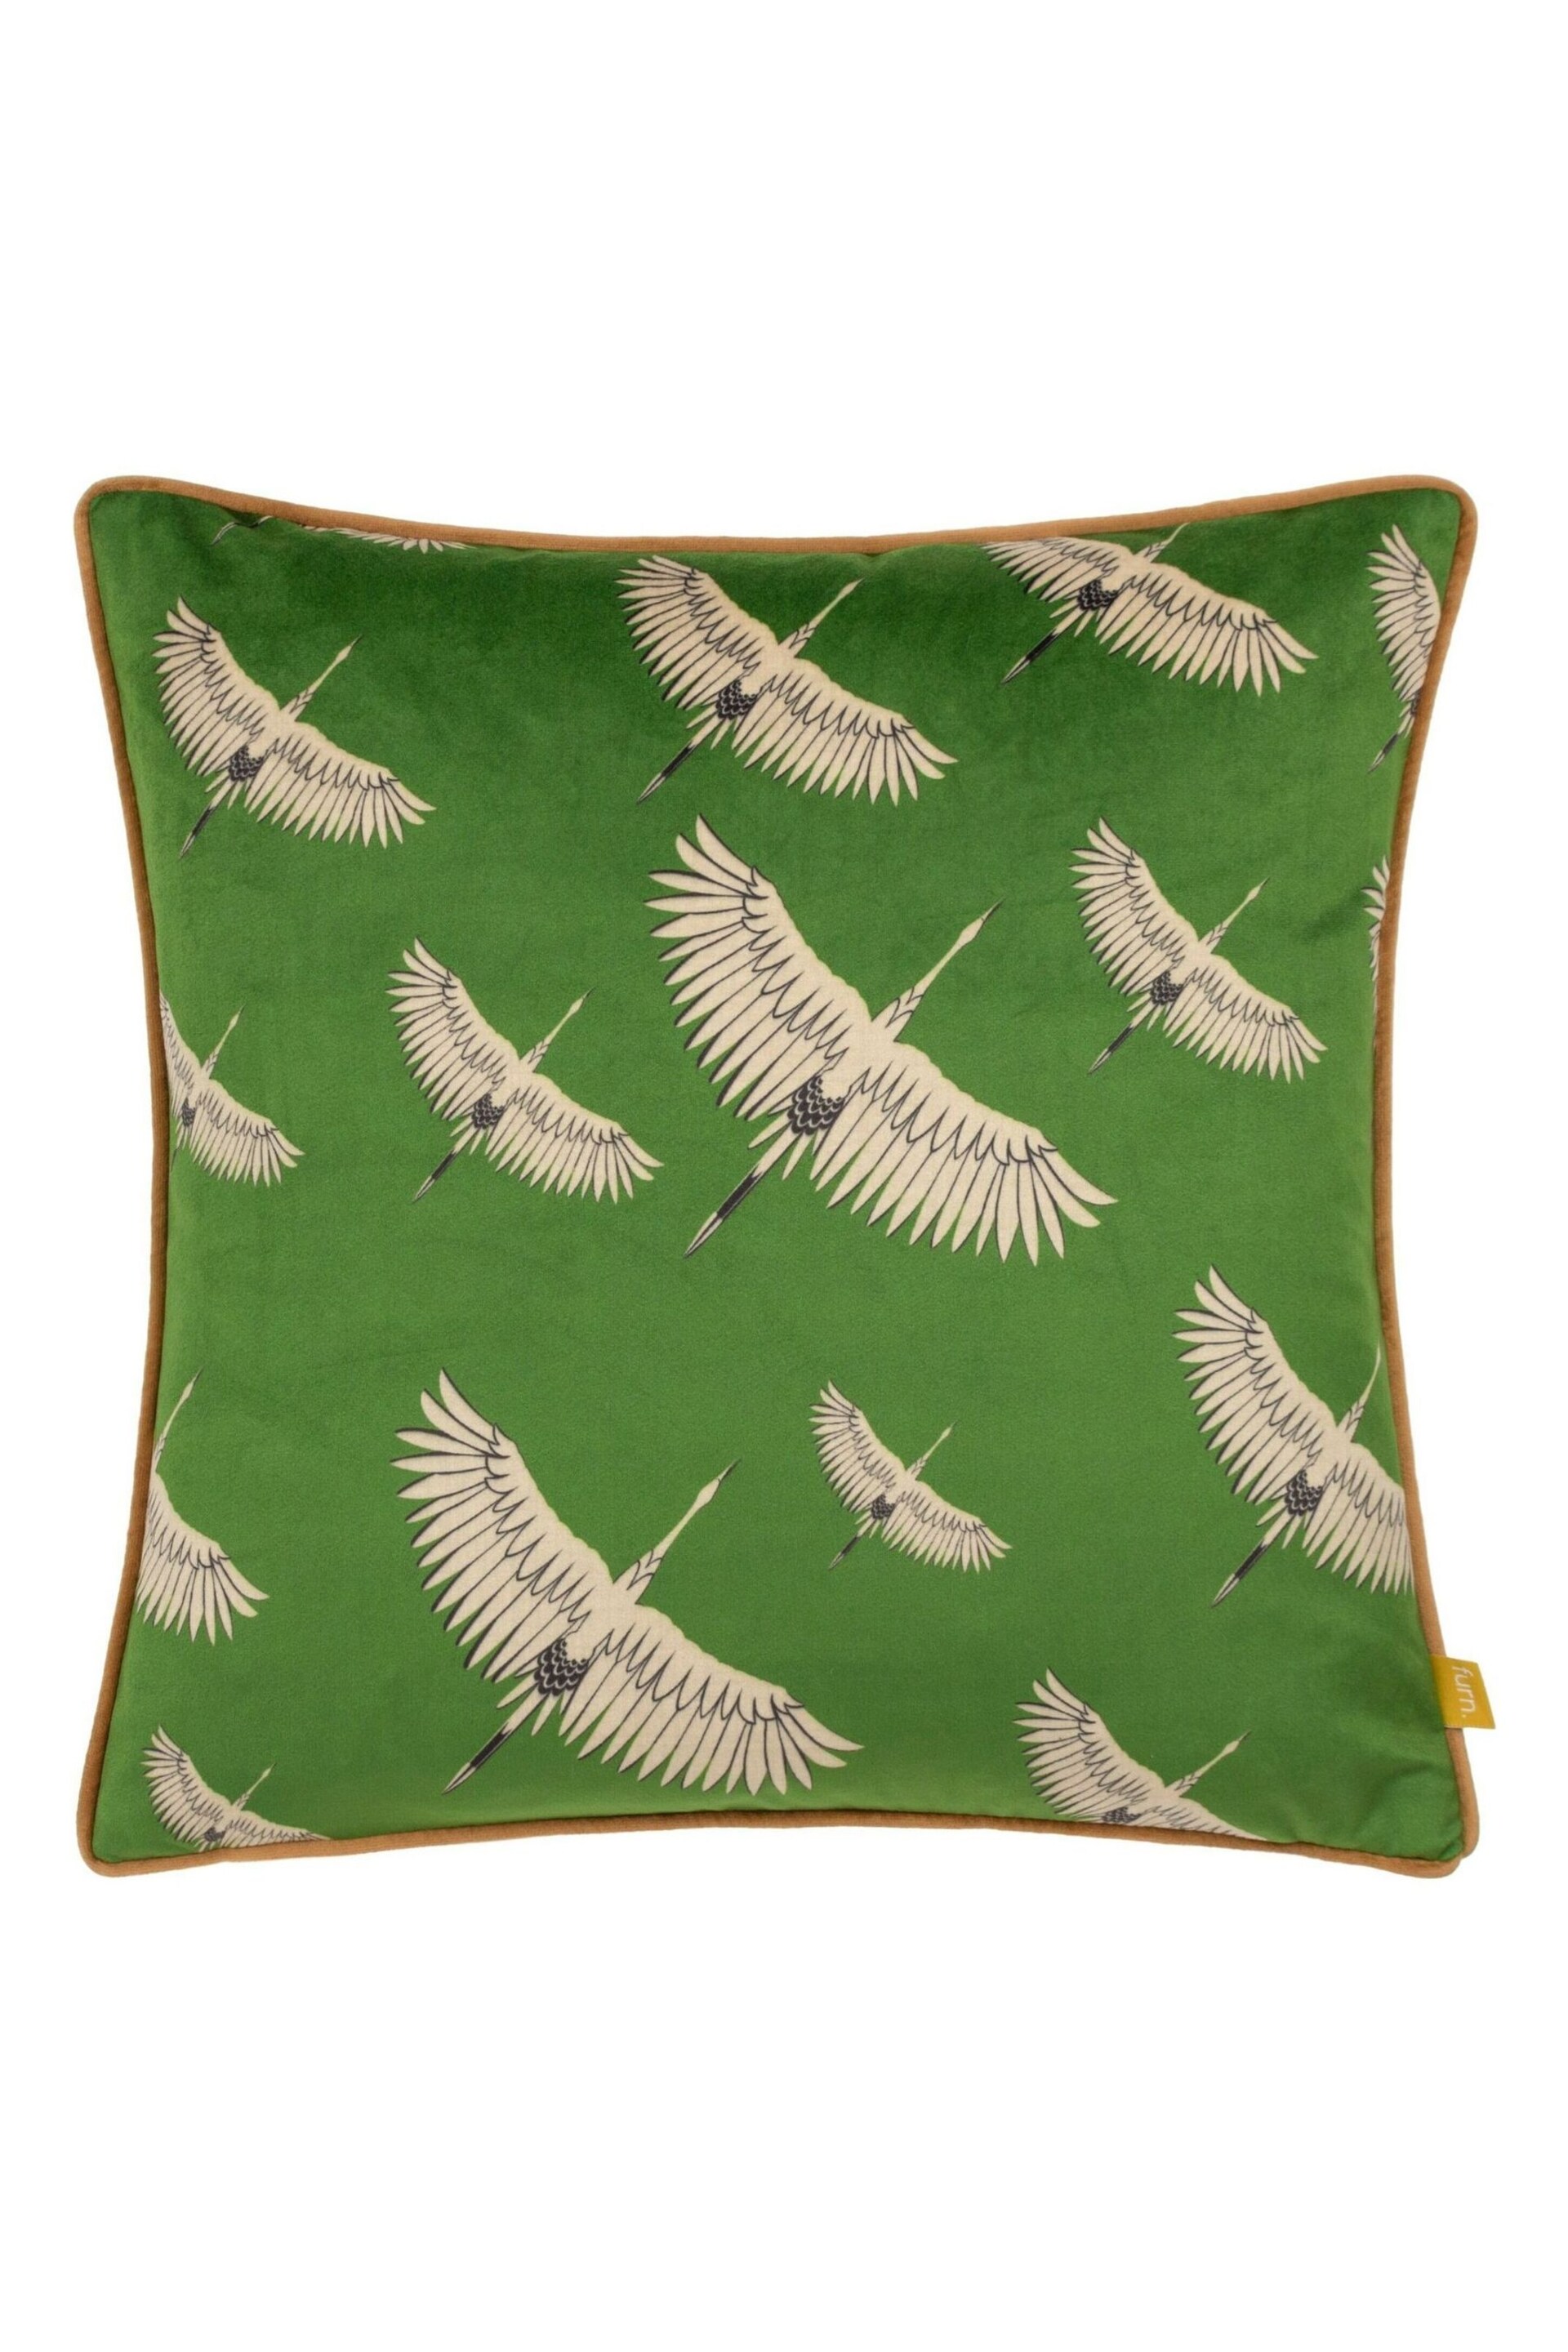 Furn Green Avalon Velvet Piped Feather Filled Cushion - Image 3 of 5